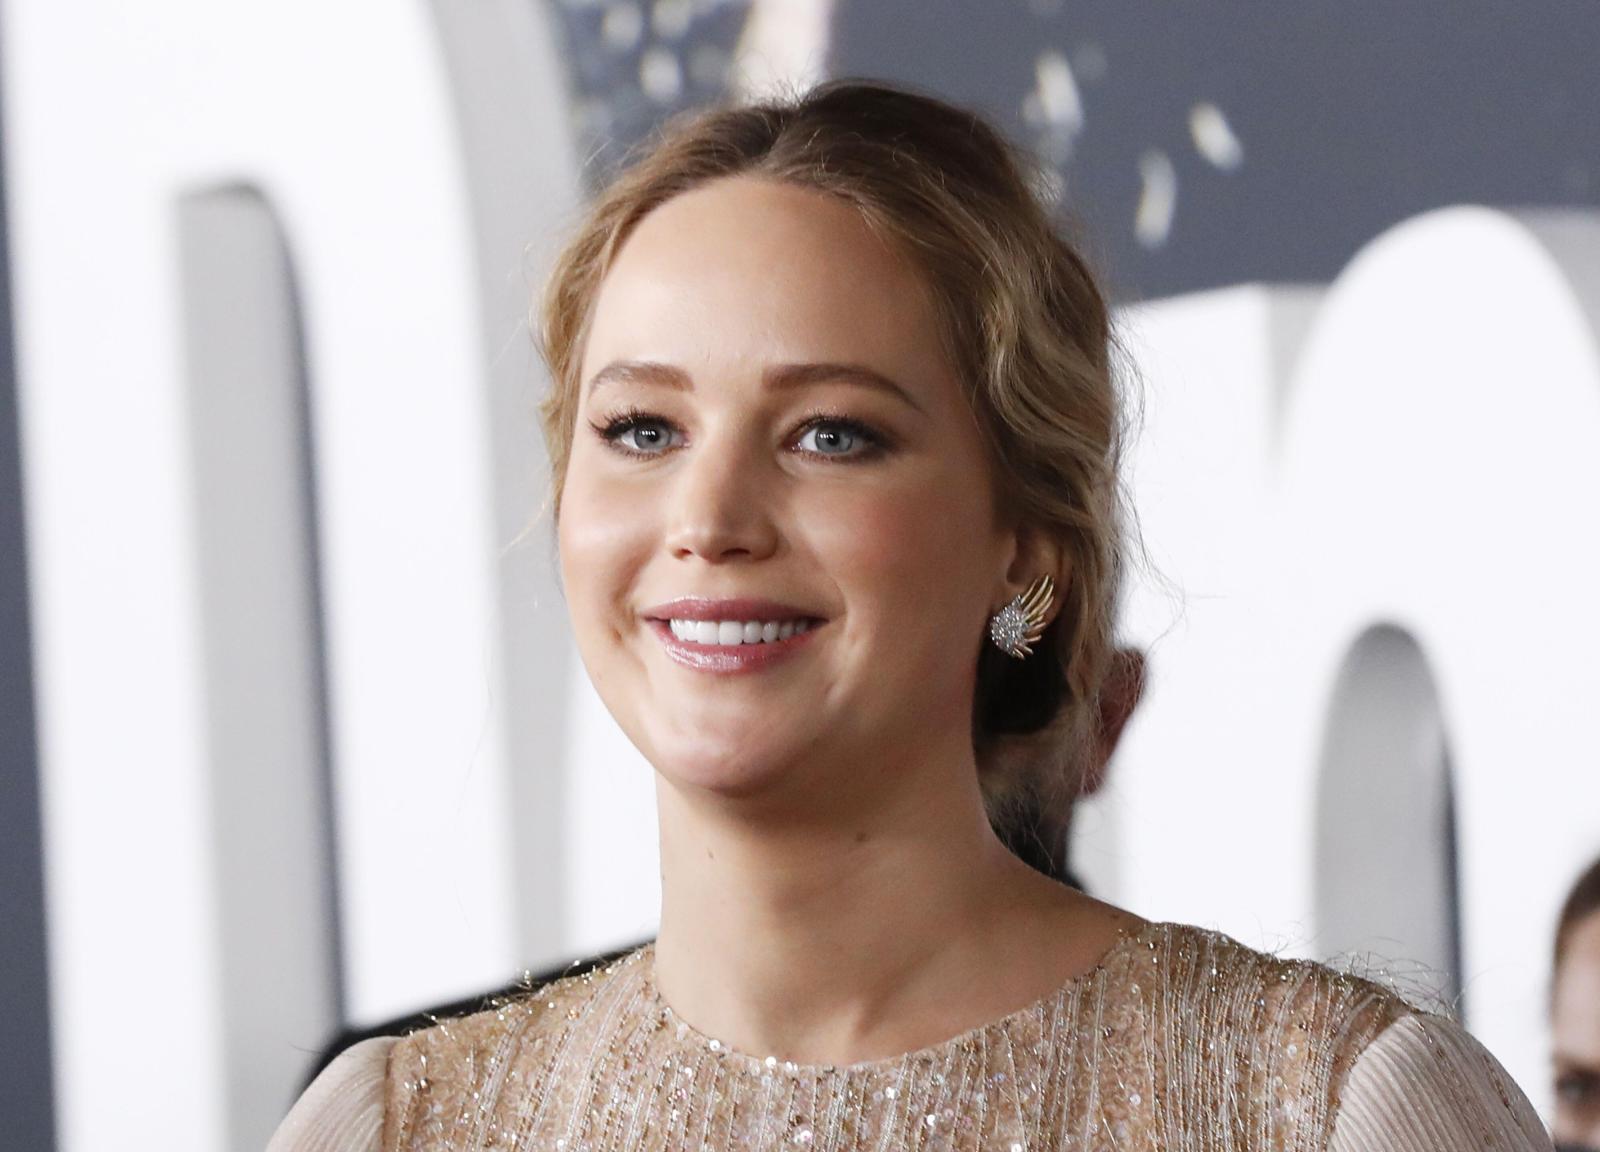 From Jennifer to Jude, These 5 Celebs Prove Money Can't Buy Confidence - image 3